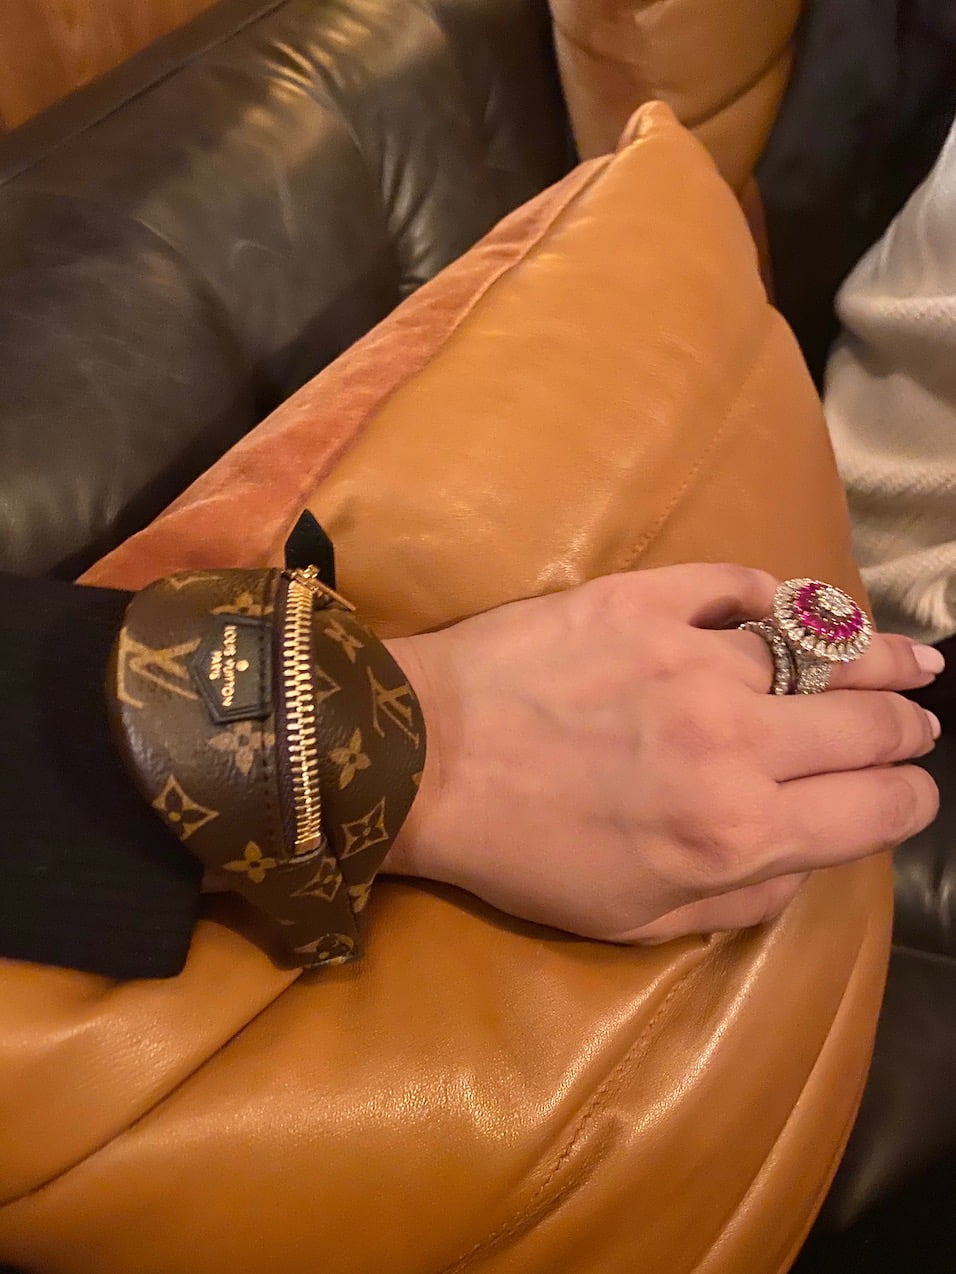 Louis Vuitton Has Mini Backpack And Bumbag Bracelets So You Can Party  Hands-Free 